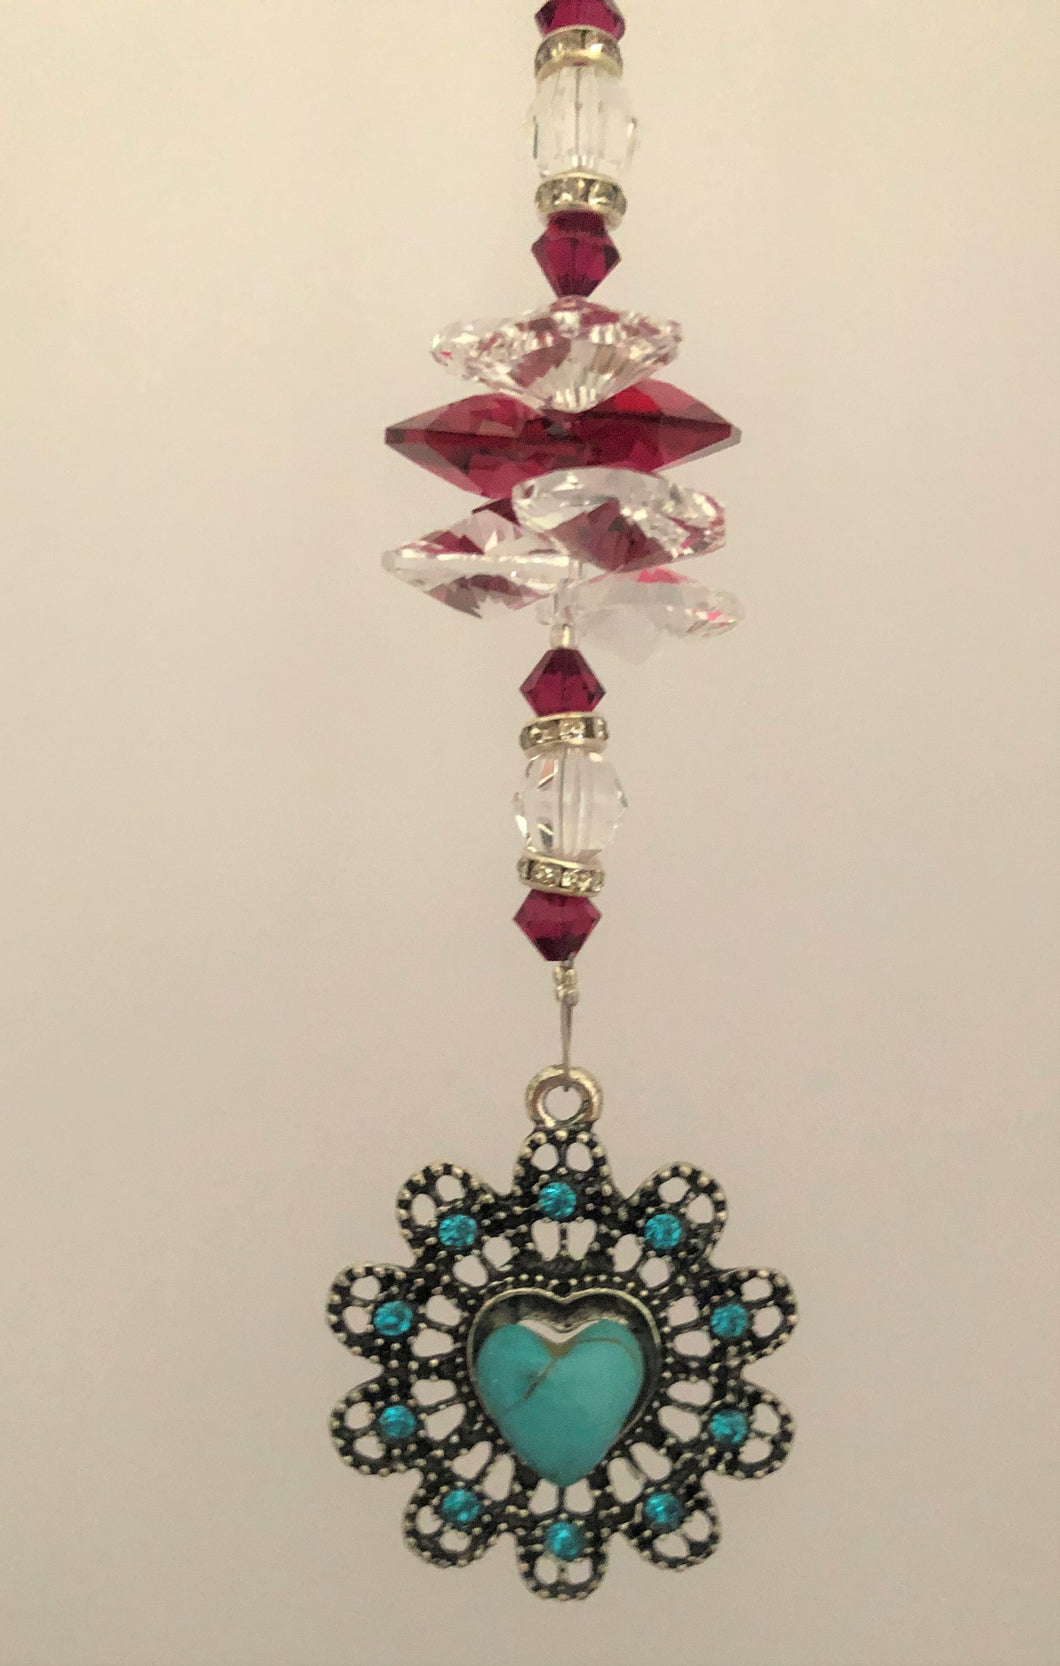 This beautiful Circle Heart suncatcher which is decorated with crystals and Garnet